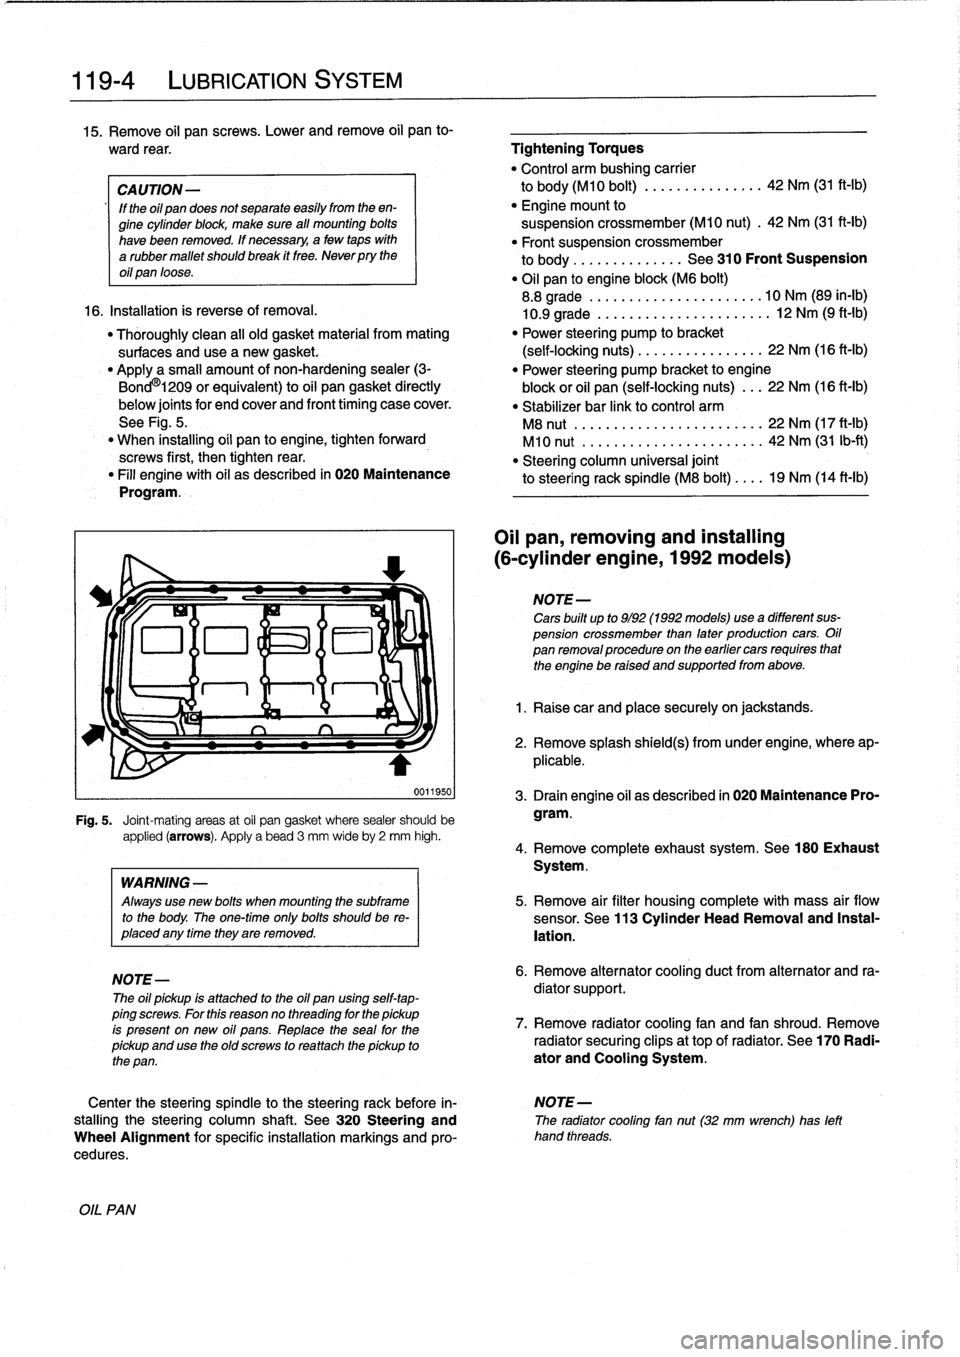 BMW 318i 1995 E36 Workshop Manual 
119-
4

	

LUBRICATION
SYSTEM

15
.
Remove
oil
pan
screws
.
Lower
andremove
oil
pan
to-

ward
rear
.

	

Tightening
Torques

"
Control
arm
bushing
carrier

CAUTION-

	

to
body(M10
bolt)
............